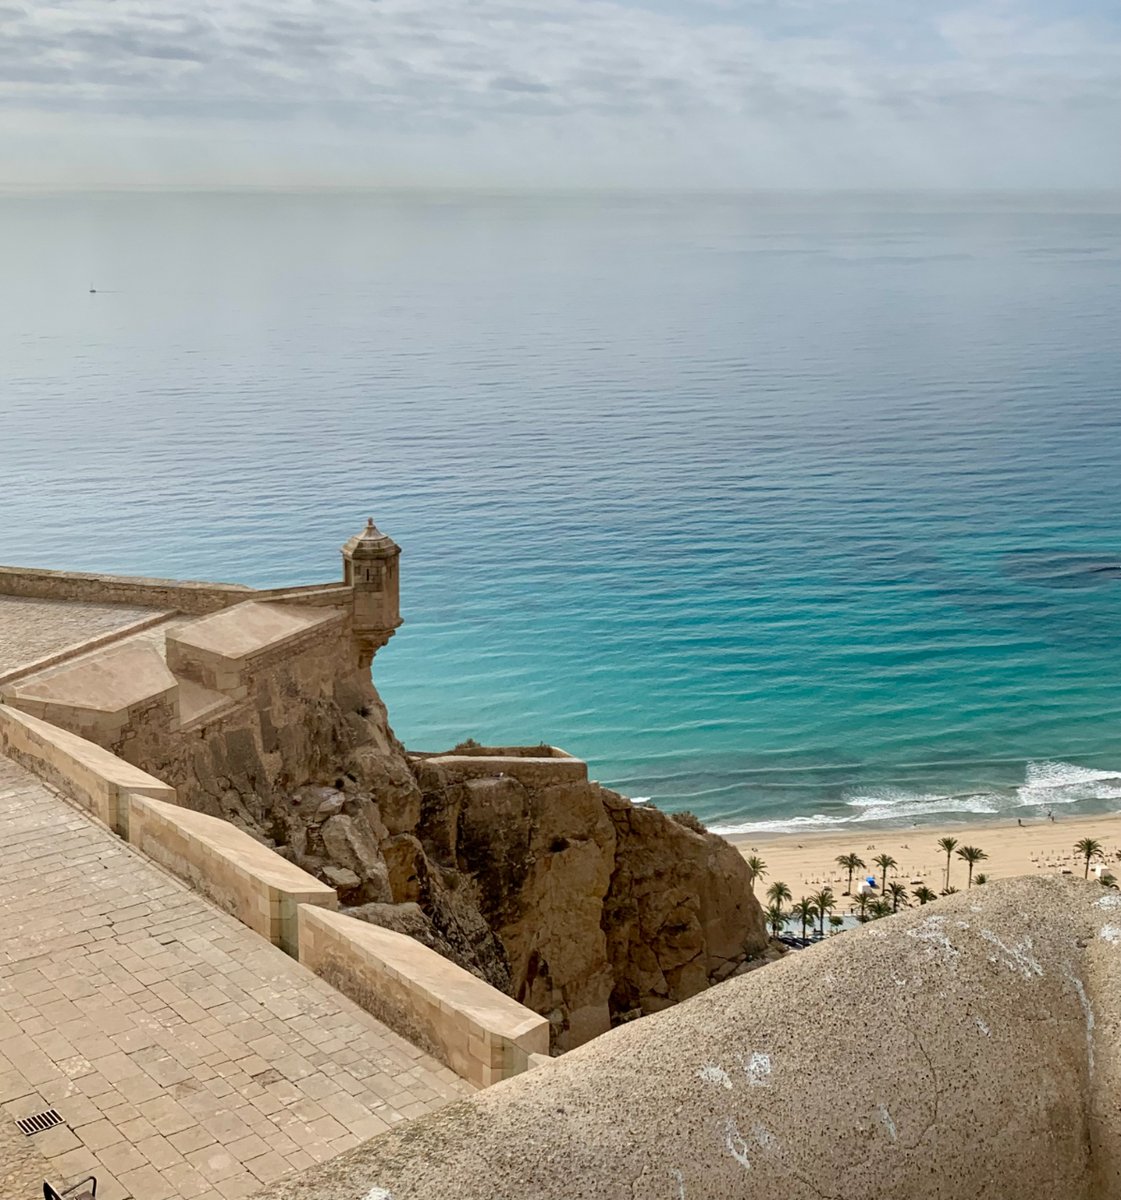 ¡Welcome to #Alicante! ☀️🌴 🙌🏼 Discover our rich historical, cultural, and architectural heritage while enjoying the hospitality of Alicante. 🌅 #Alicante #AlicanteCity #AlicanteTourism